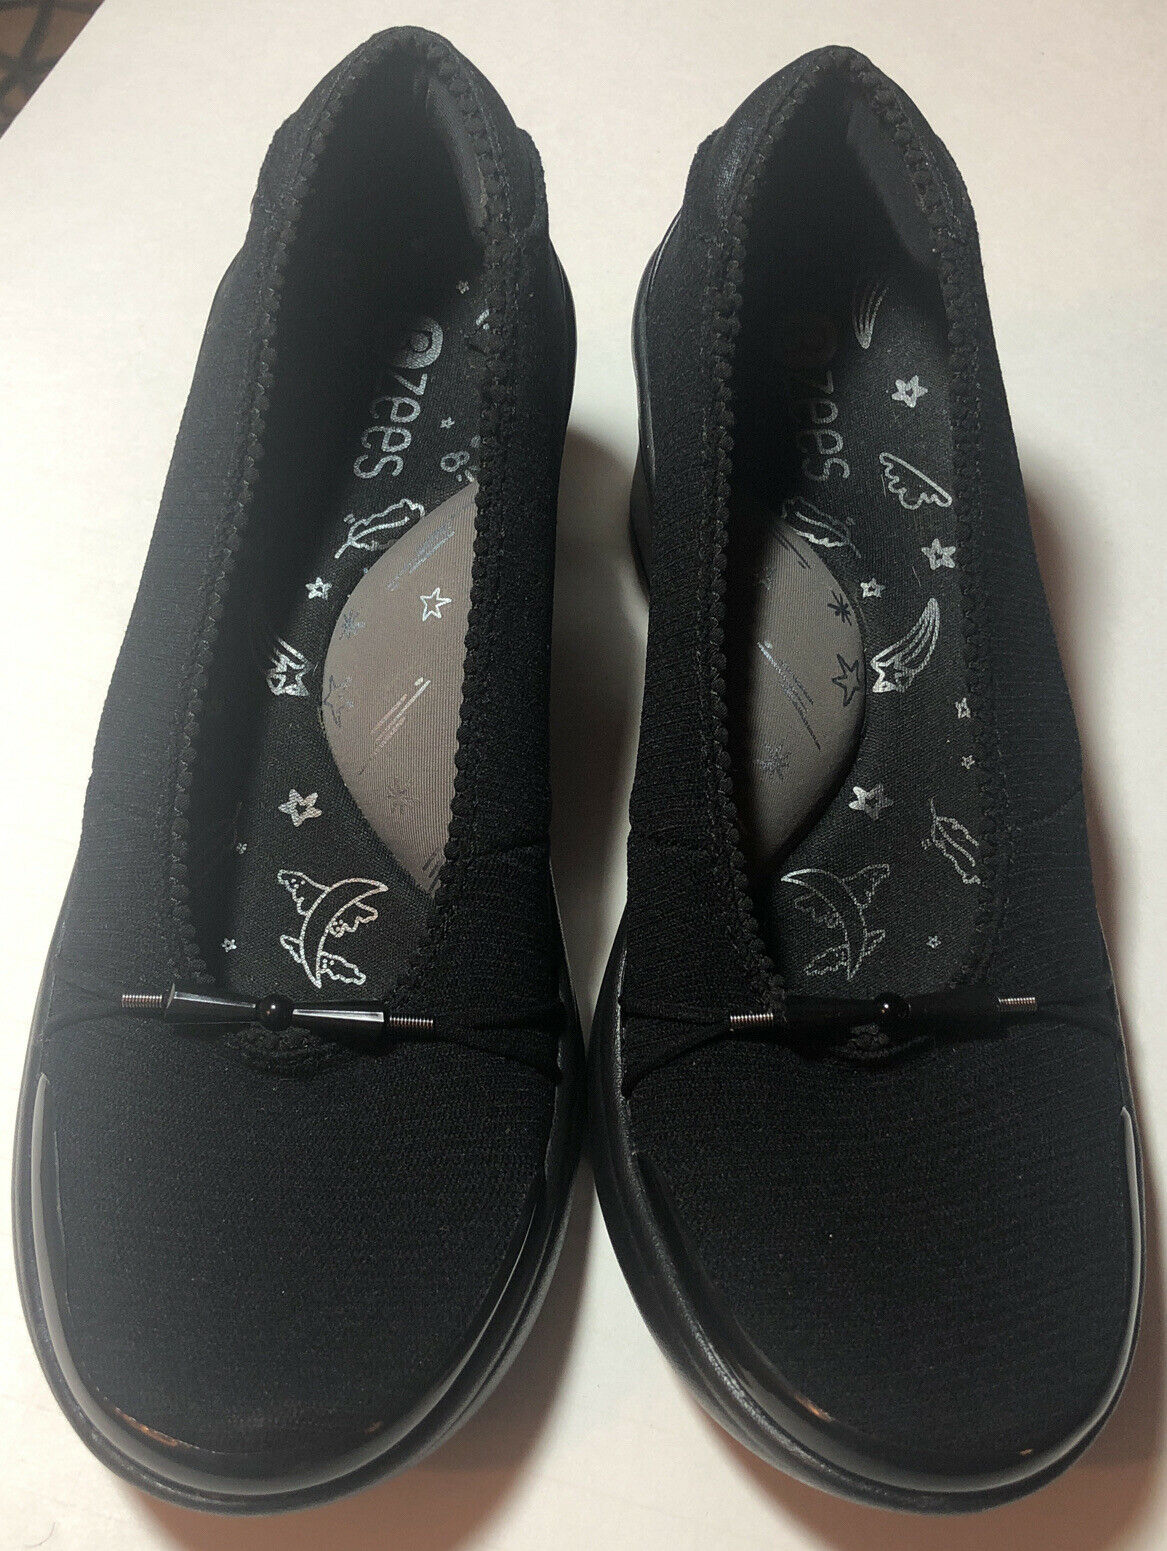 B Zees Black Fabric Loafer Walking Slip On Shoes.Size 7M